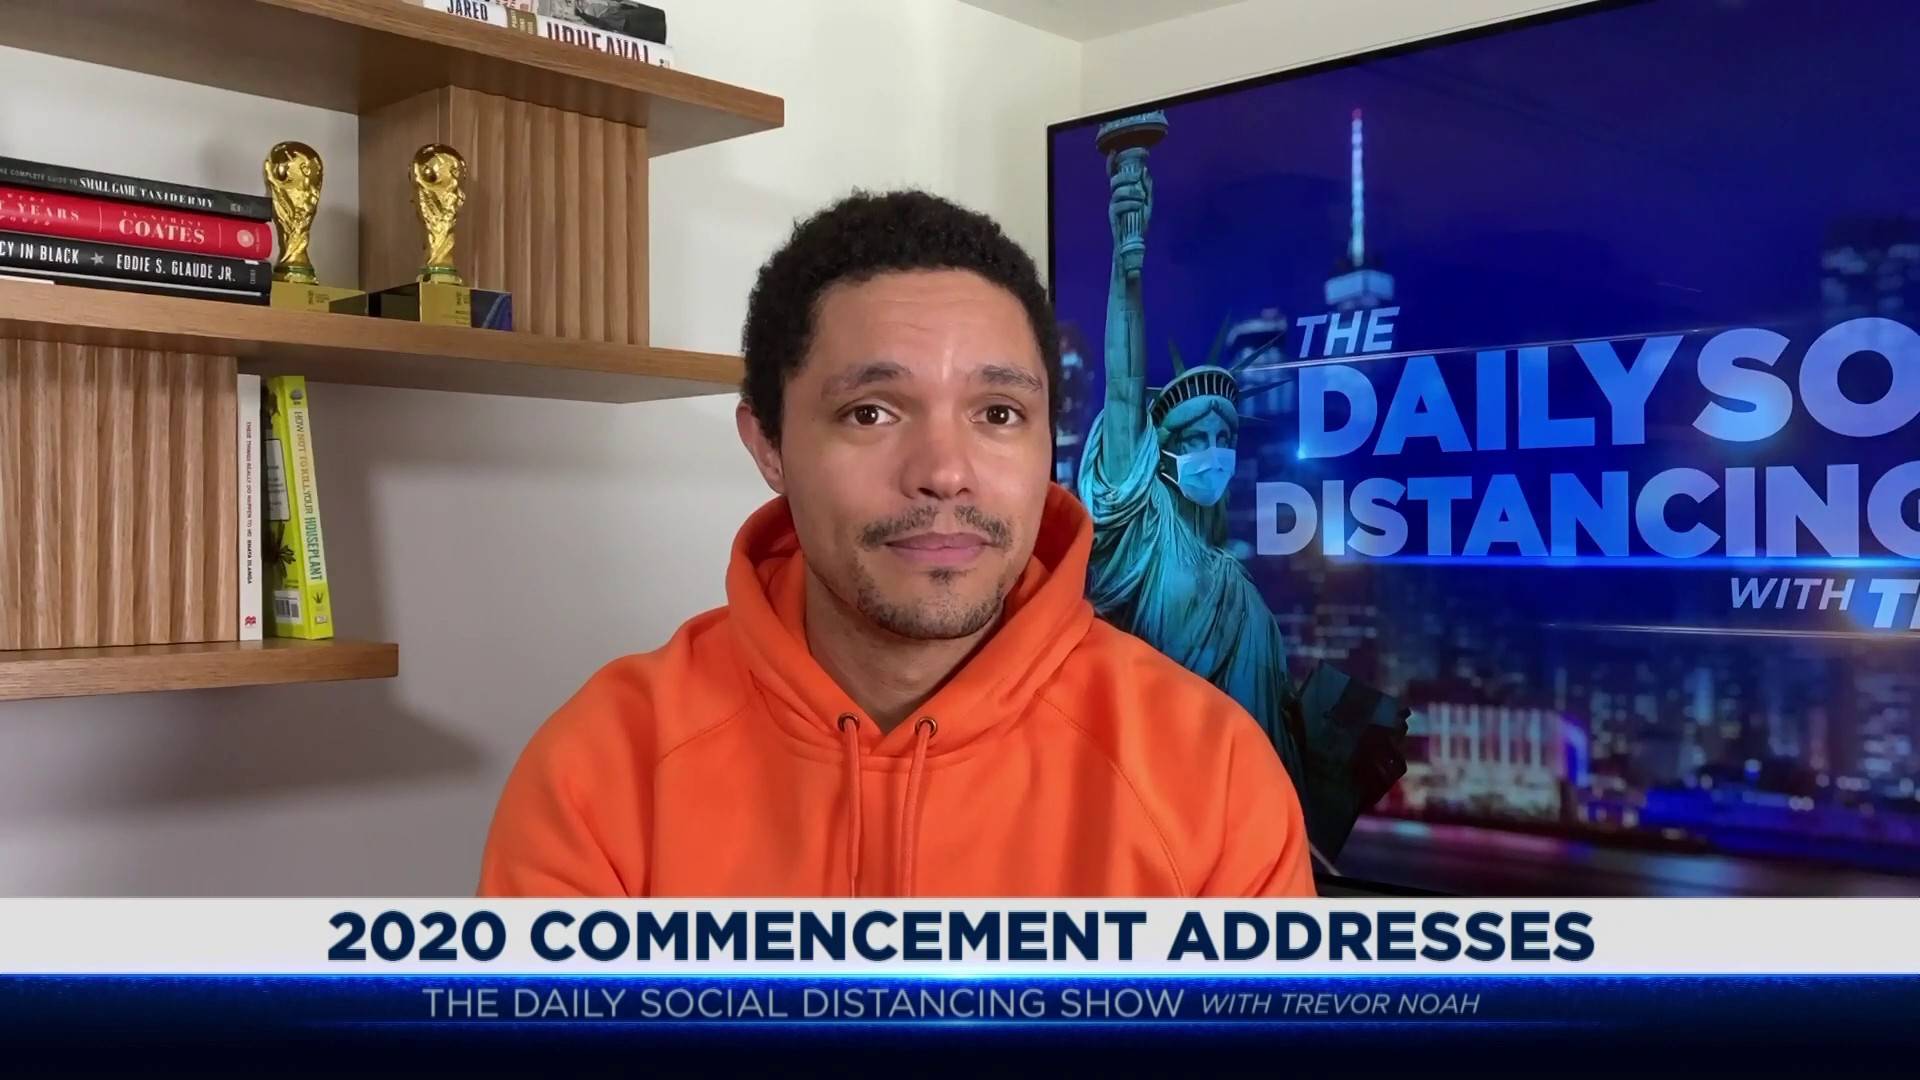 Virtual Commencement Addresses - Barack Obama Disses President Trump & Ben  Sasse Tries to Be Funny - The Daily Show with Trevor Noah (Video Clip) |  Comedy Central US